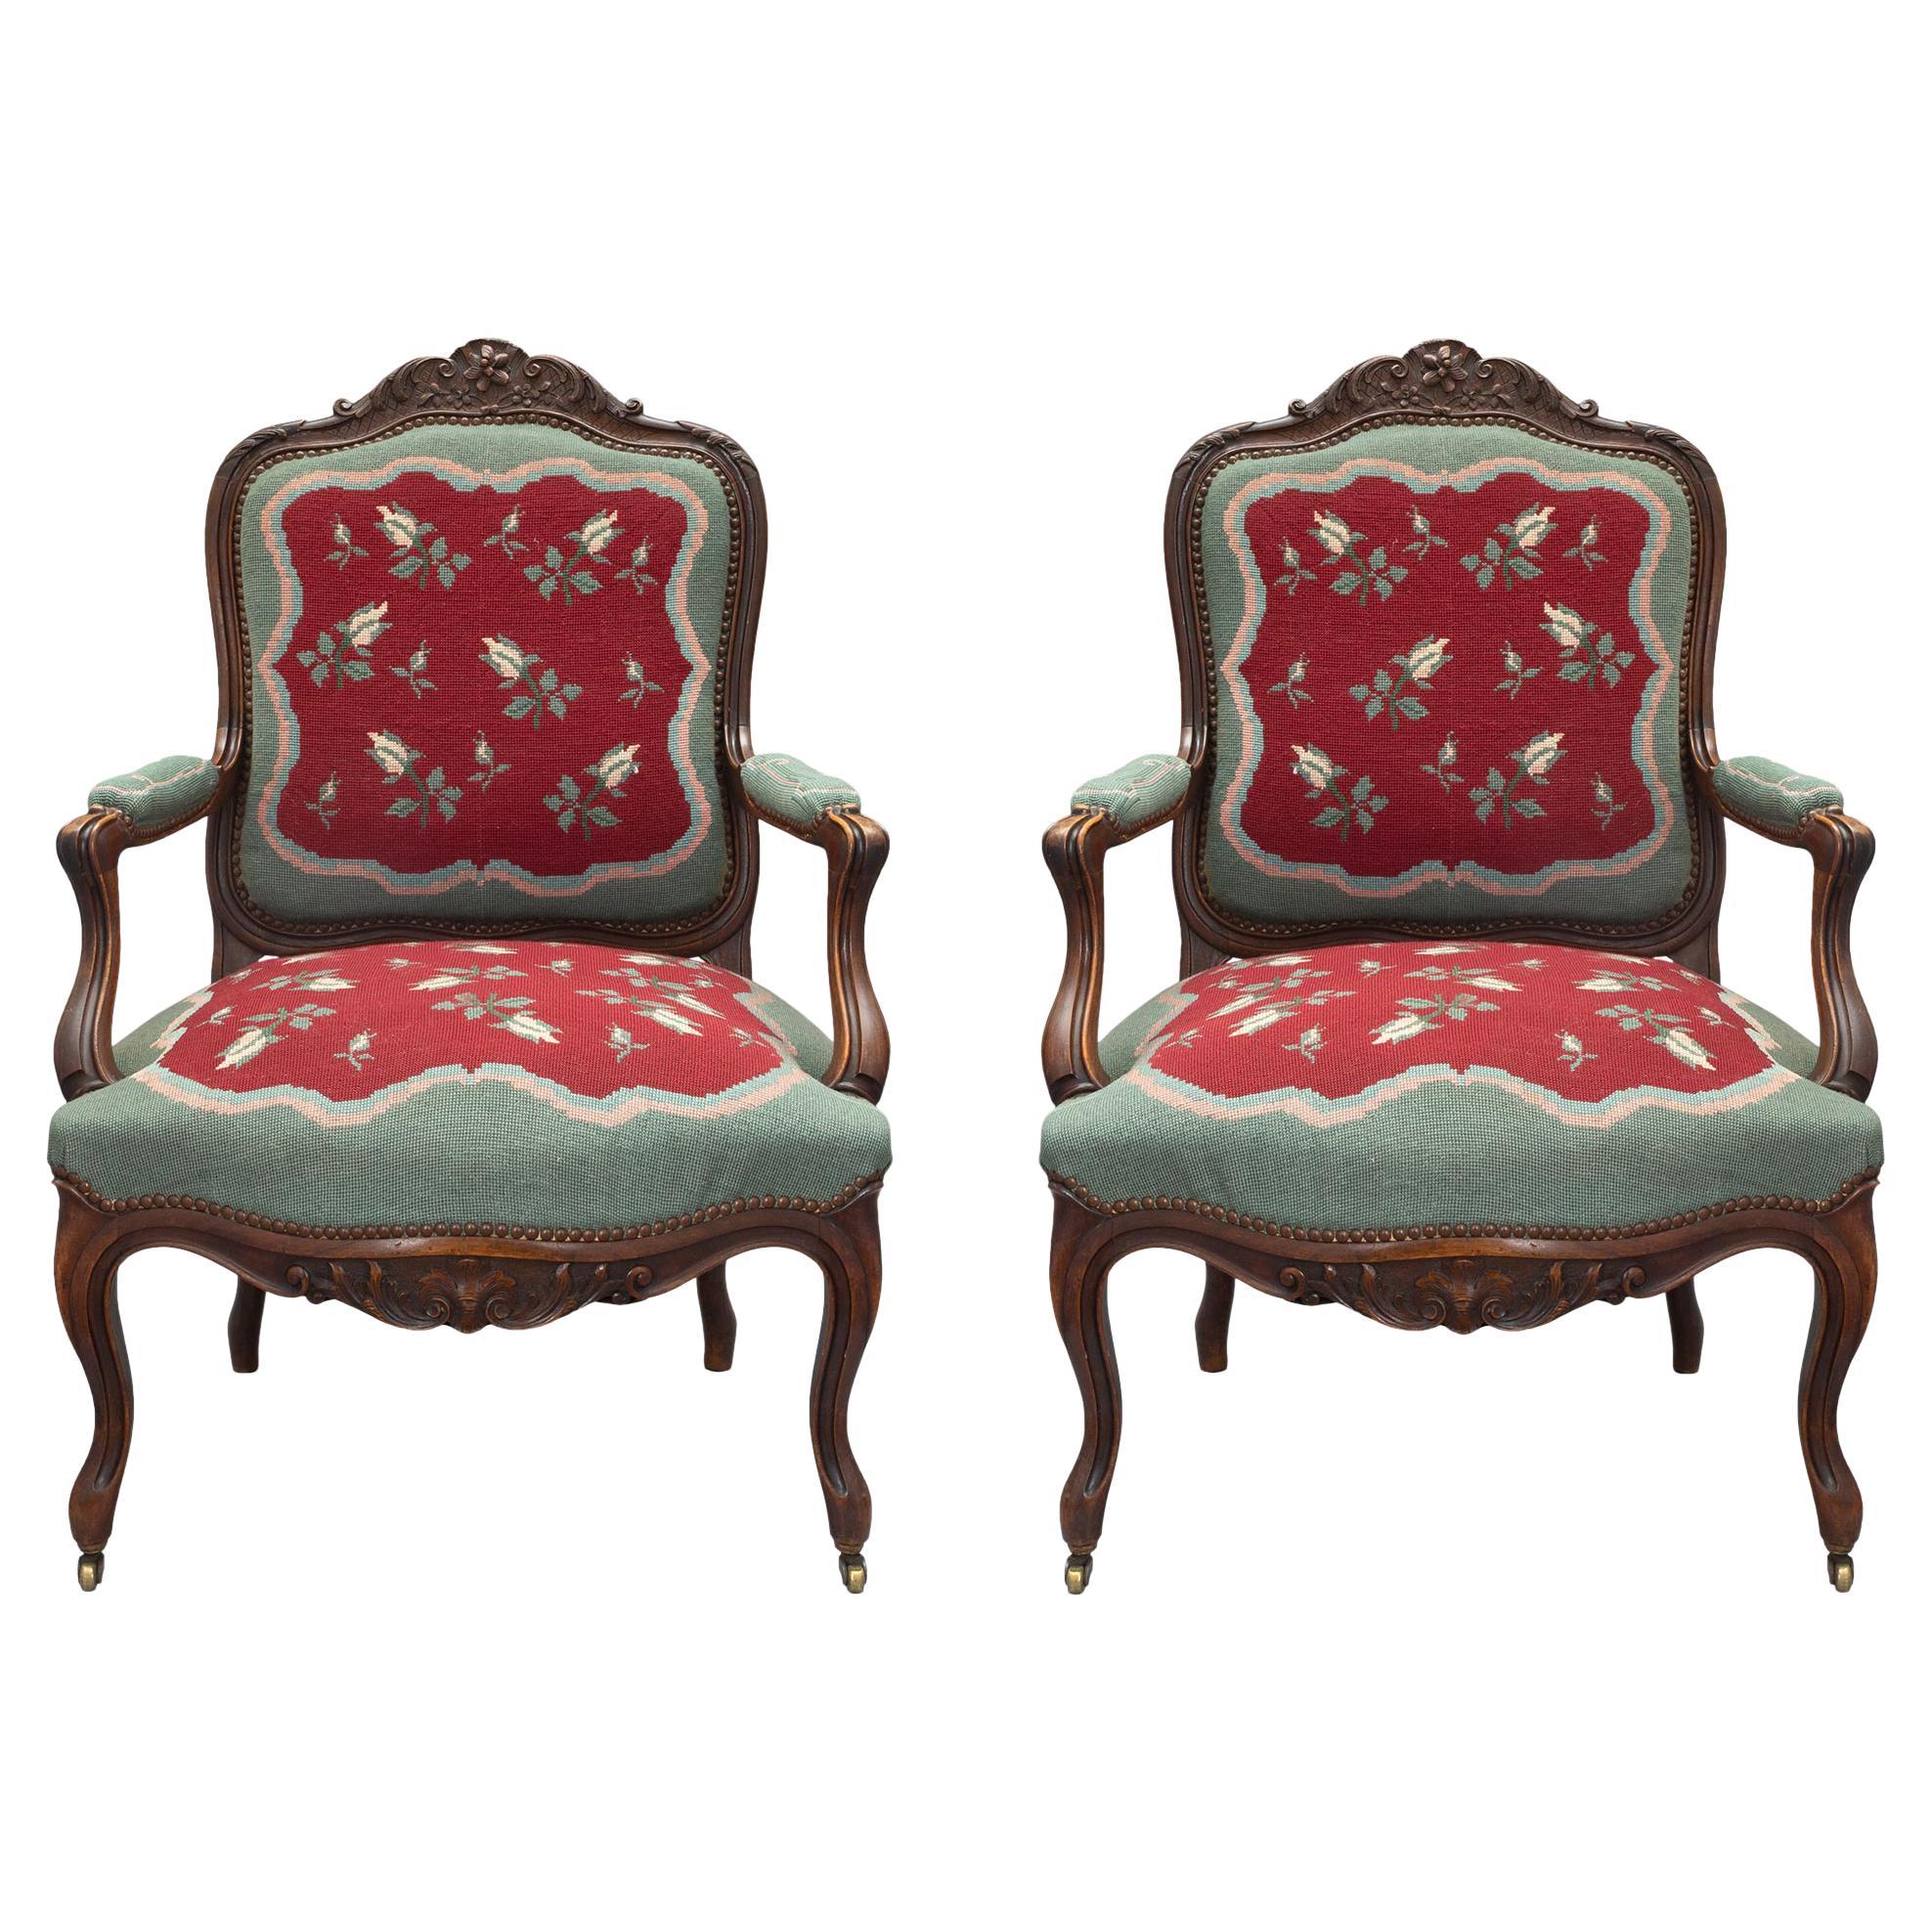 French 19th Century Louis XV Style Carved Armchairs